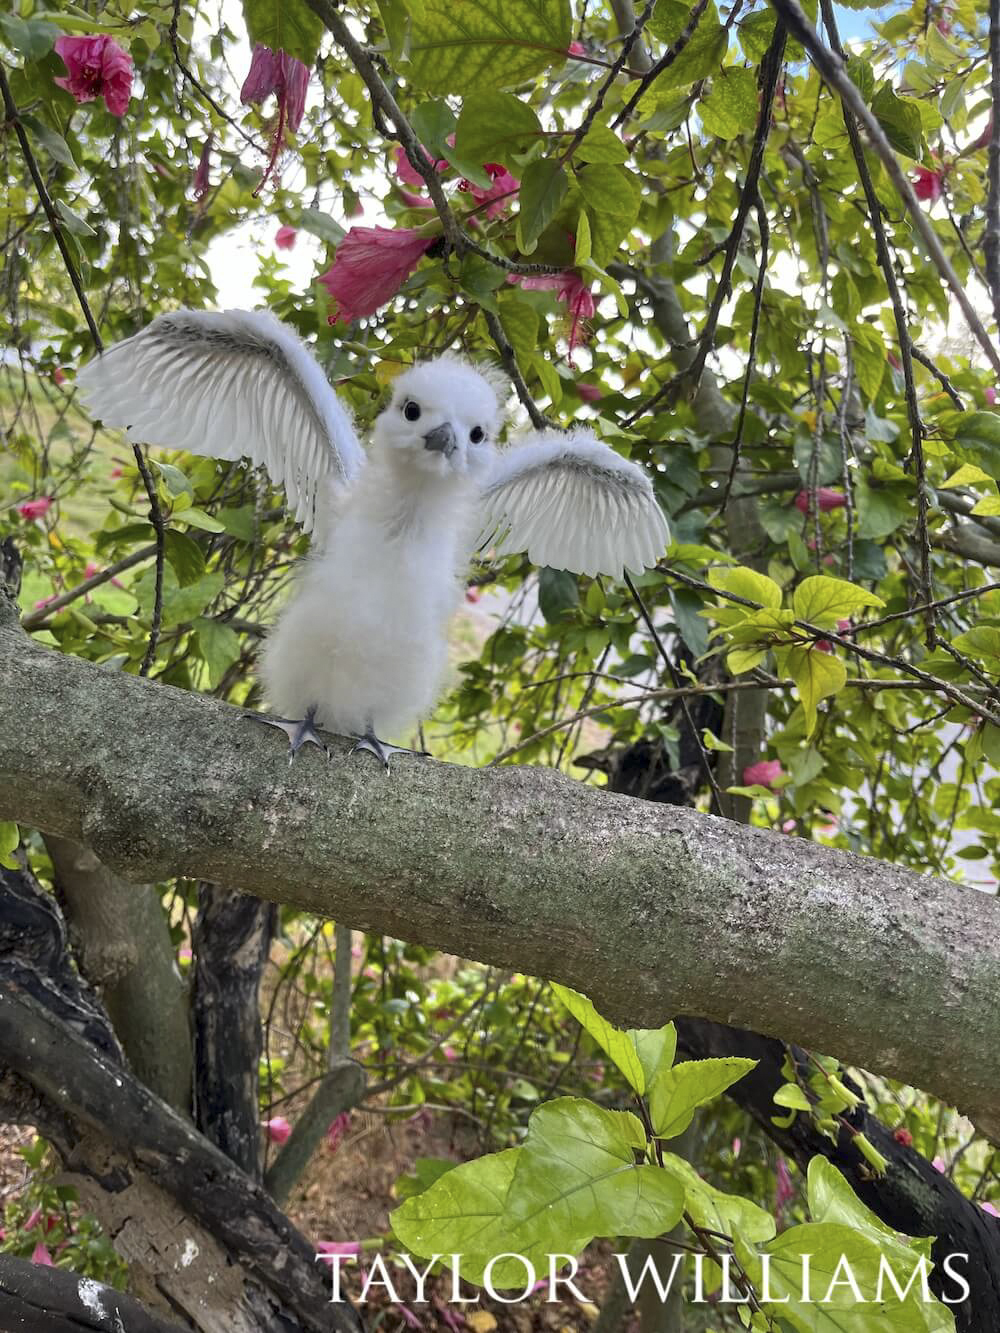 White tern chick learning how to take flight amongst a spread of foliage and flowers.